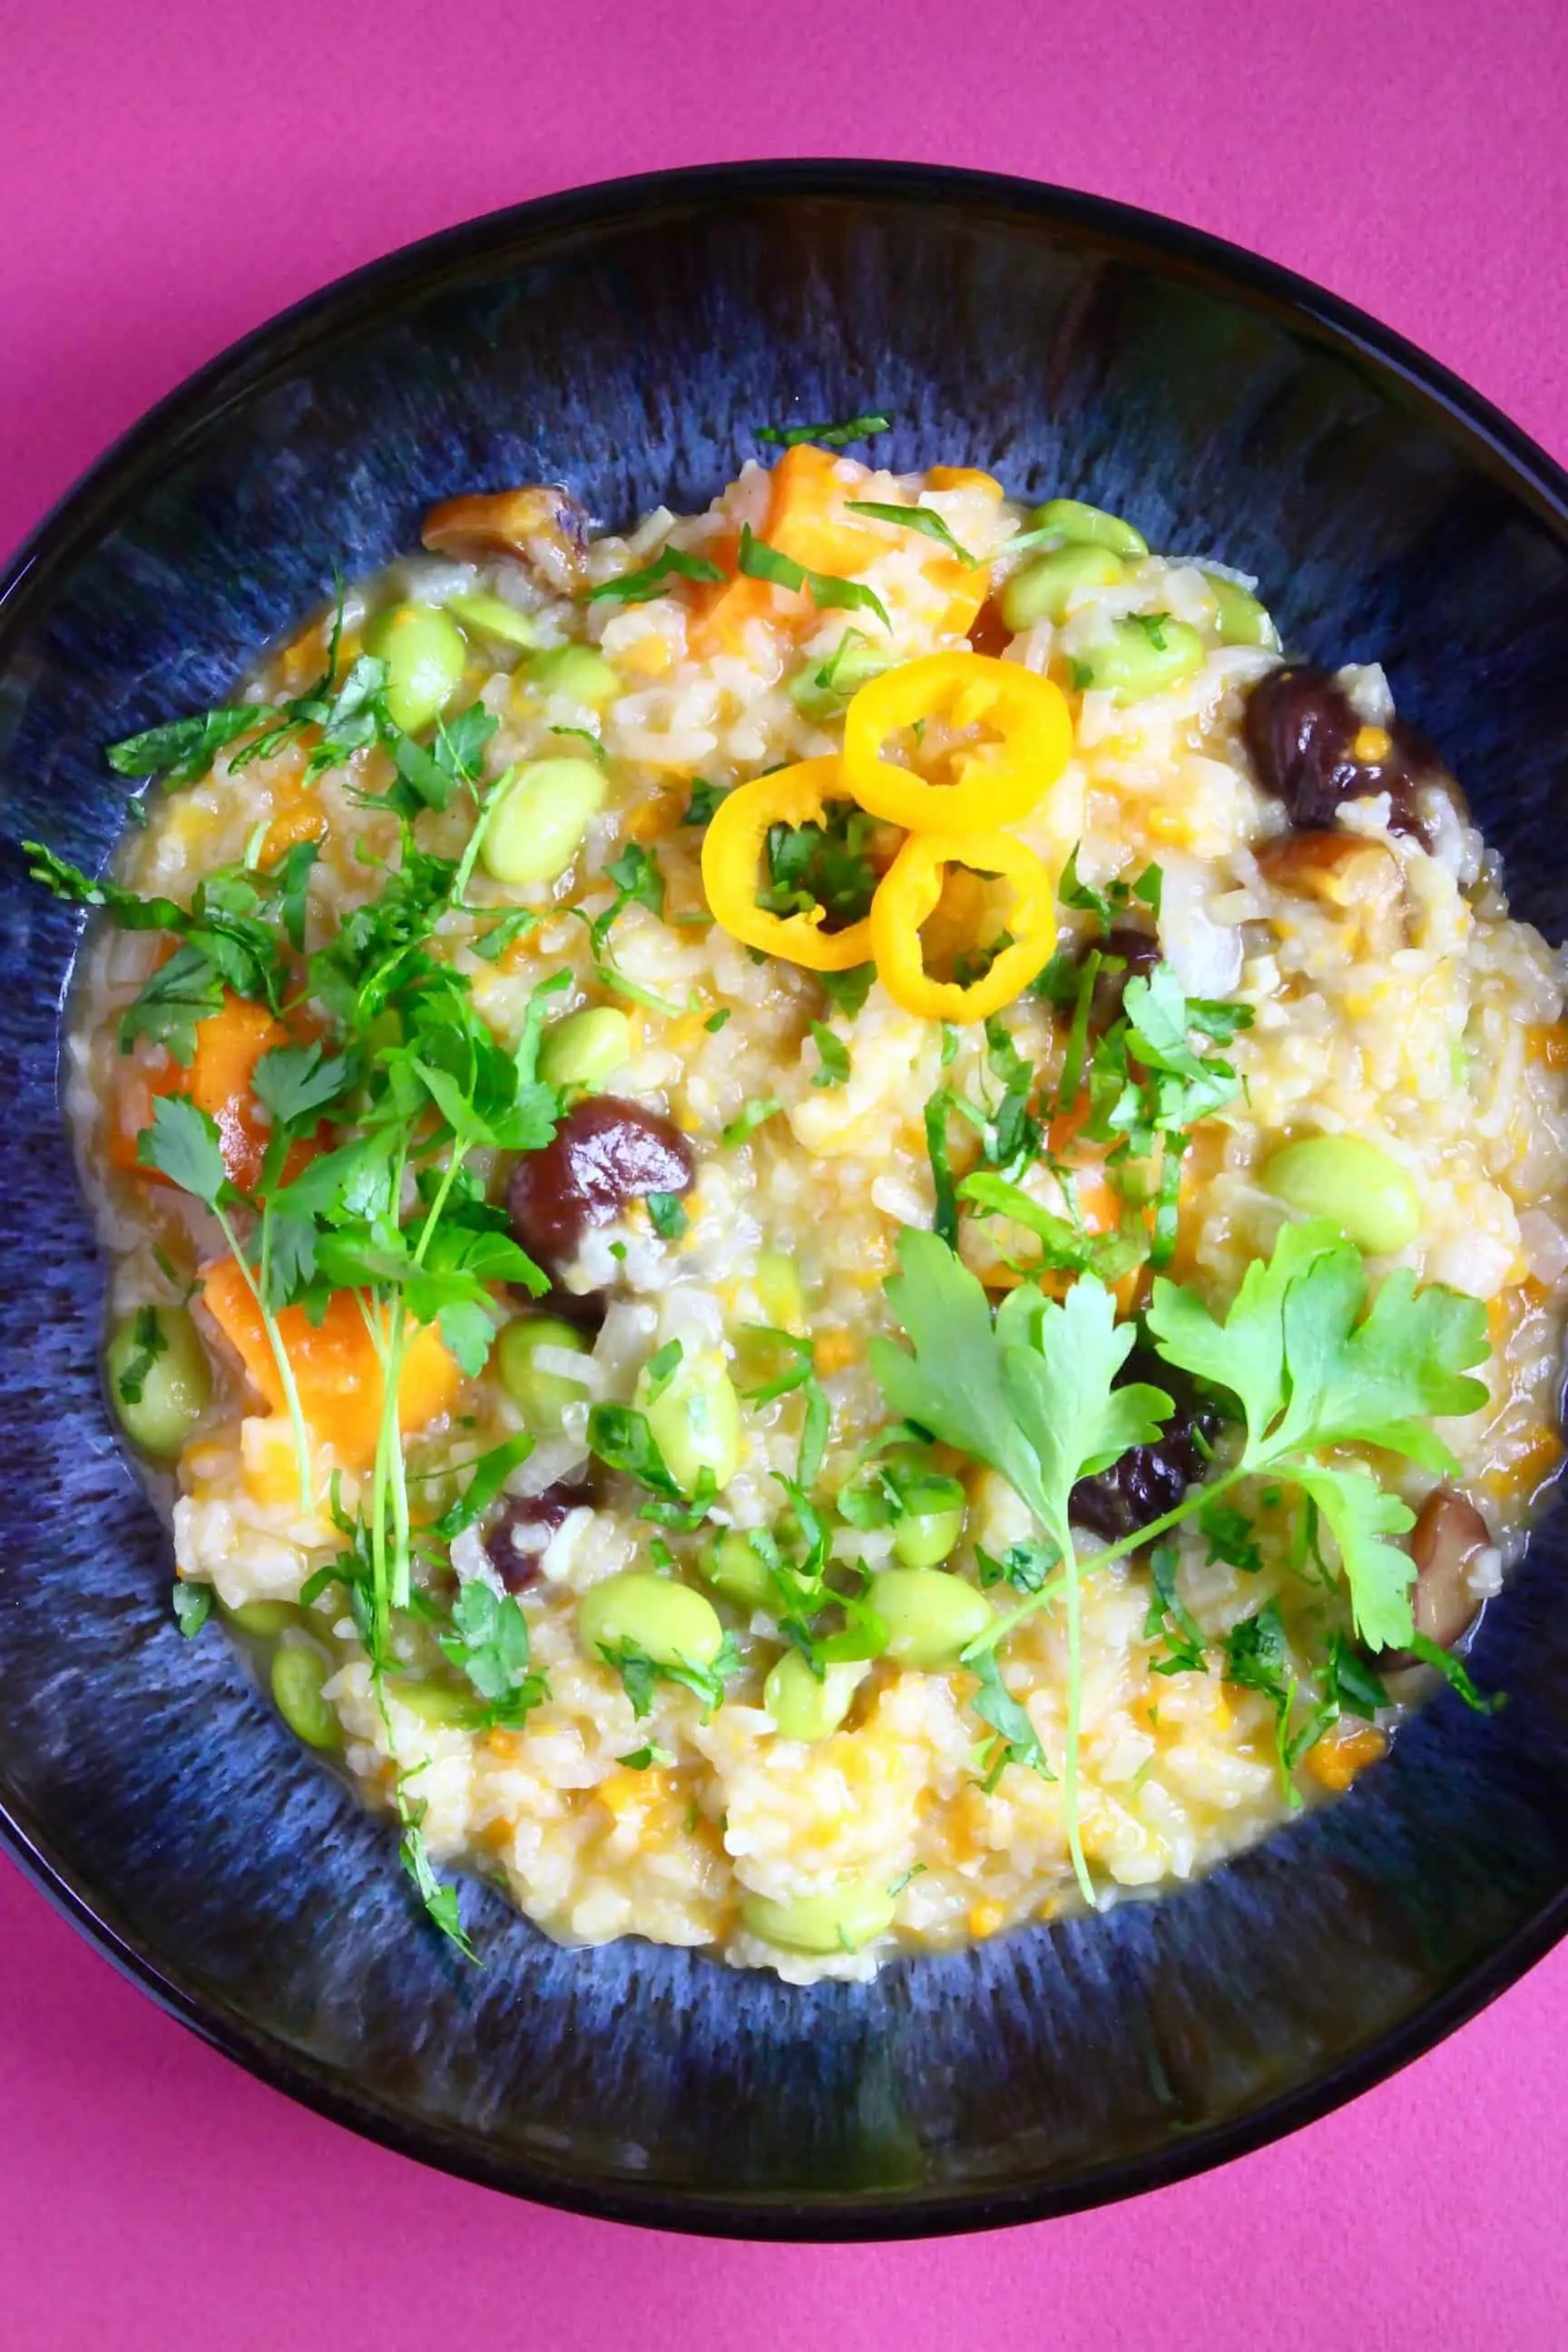 Vegan pumpkin risotto with brown chestnuts decorated with green herbs in a dark blue bowl against a bright pink background